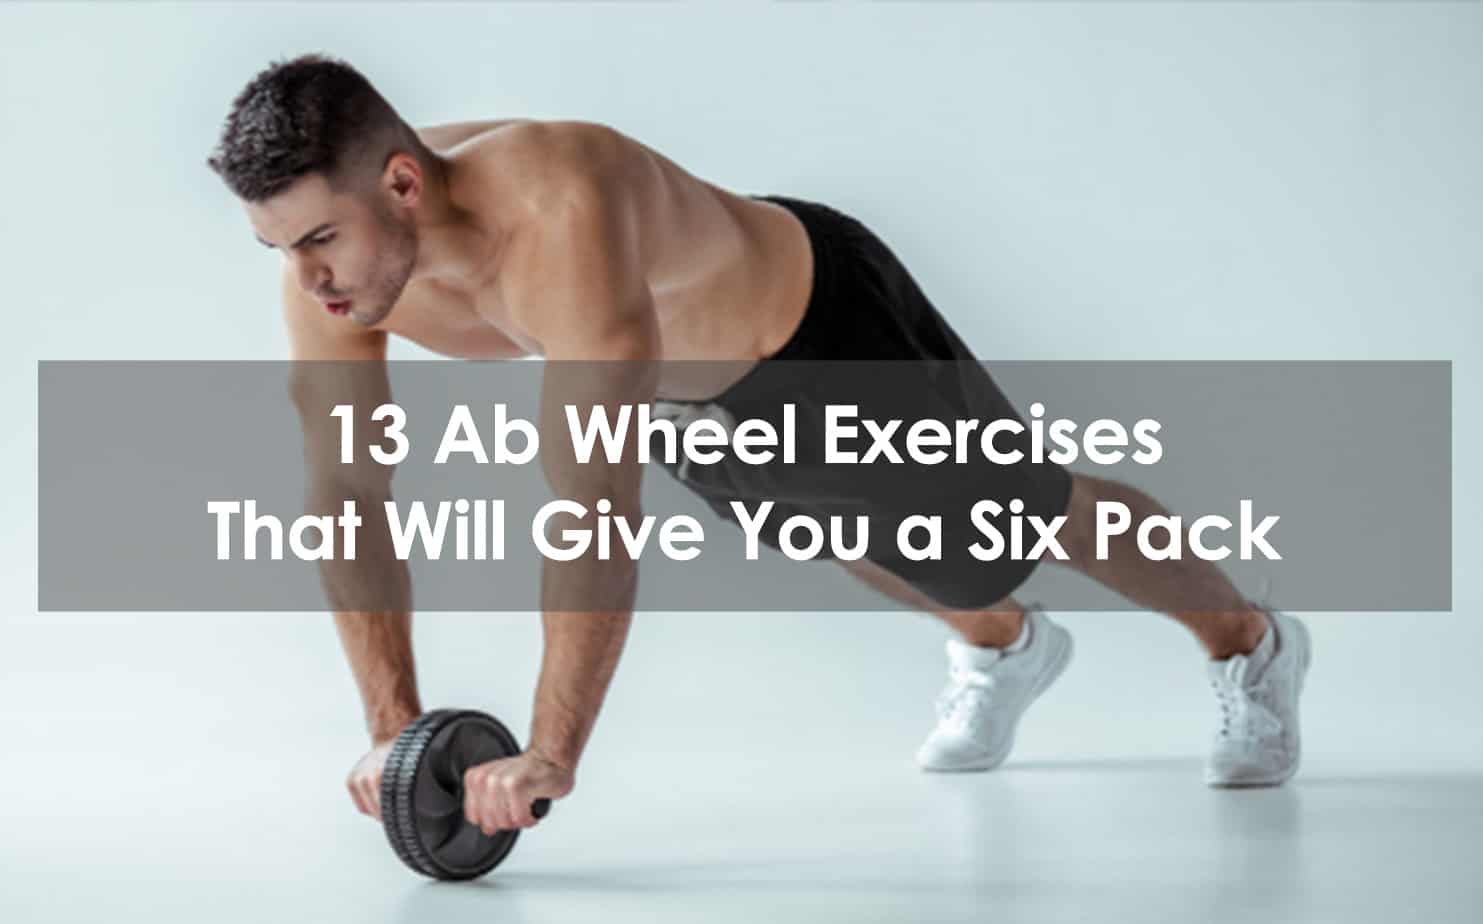 Raad Modderig Joseph Banks 13 Ab Wheel Exercises That Will Give You A Six Pack